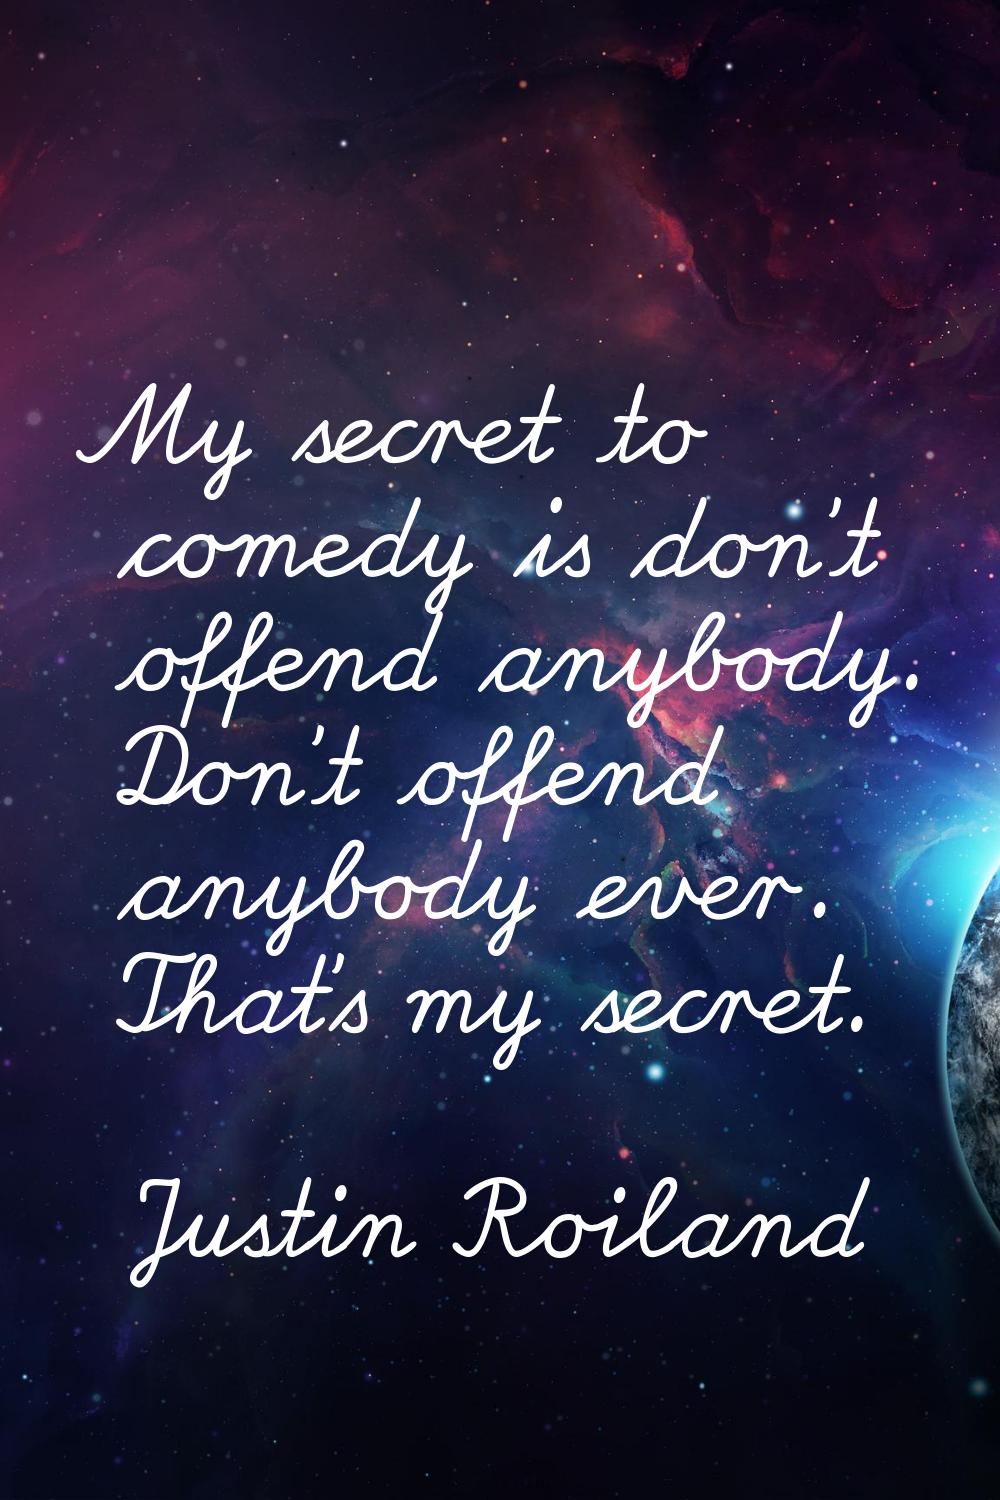 My secret to comedy is don't offend anybody. Don't offend anybody ever. That's my secret.